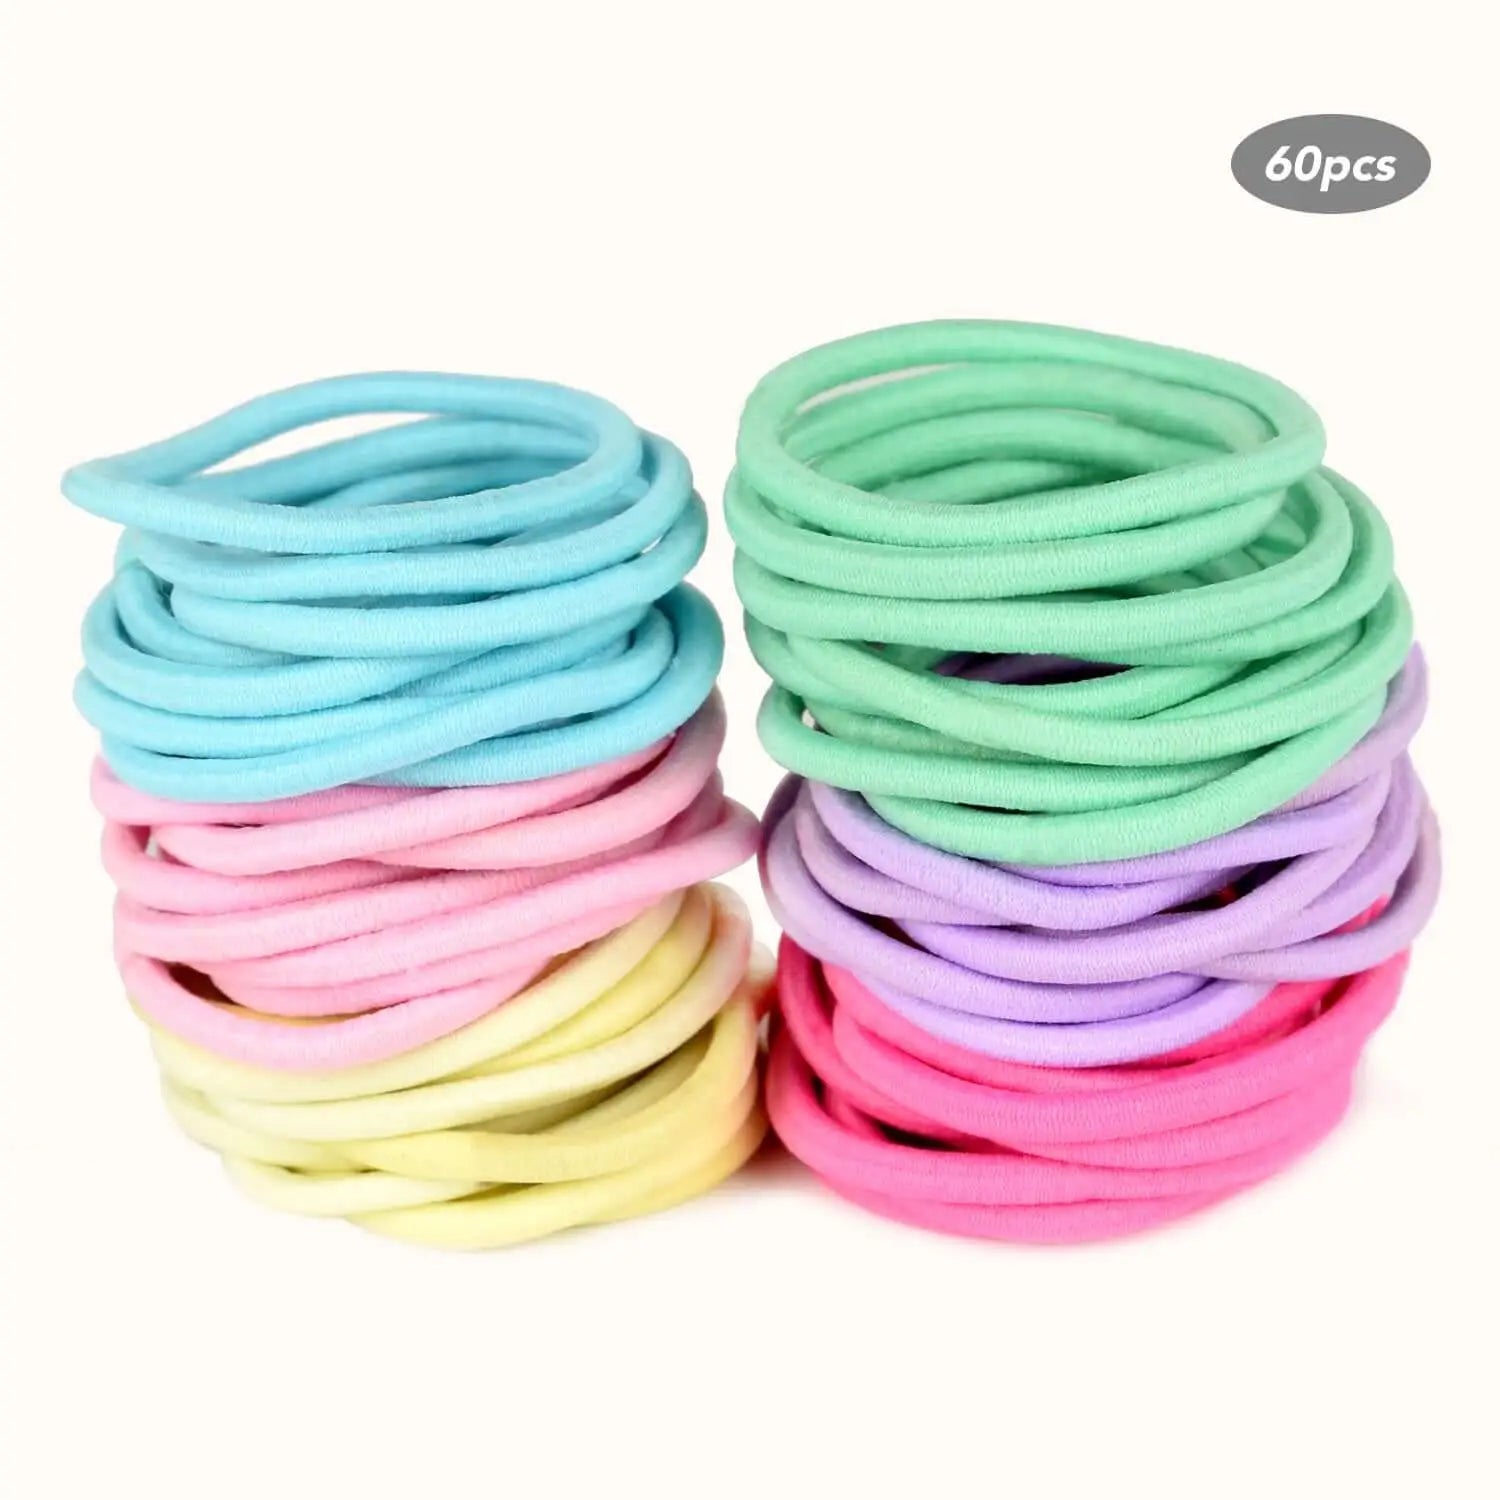 9pcs Women's Green Elastic Hair Ties For High Ponytail And Buns, Suitable  For Daily Use